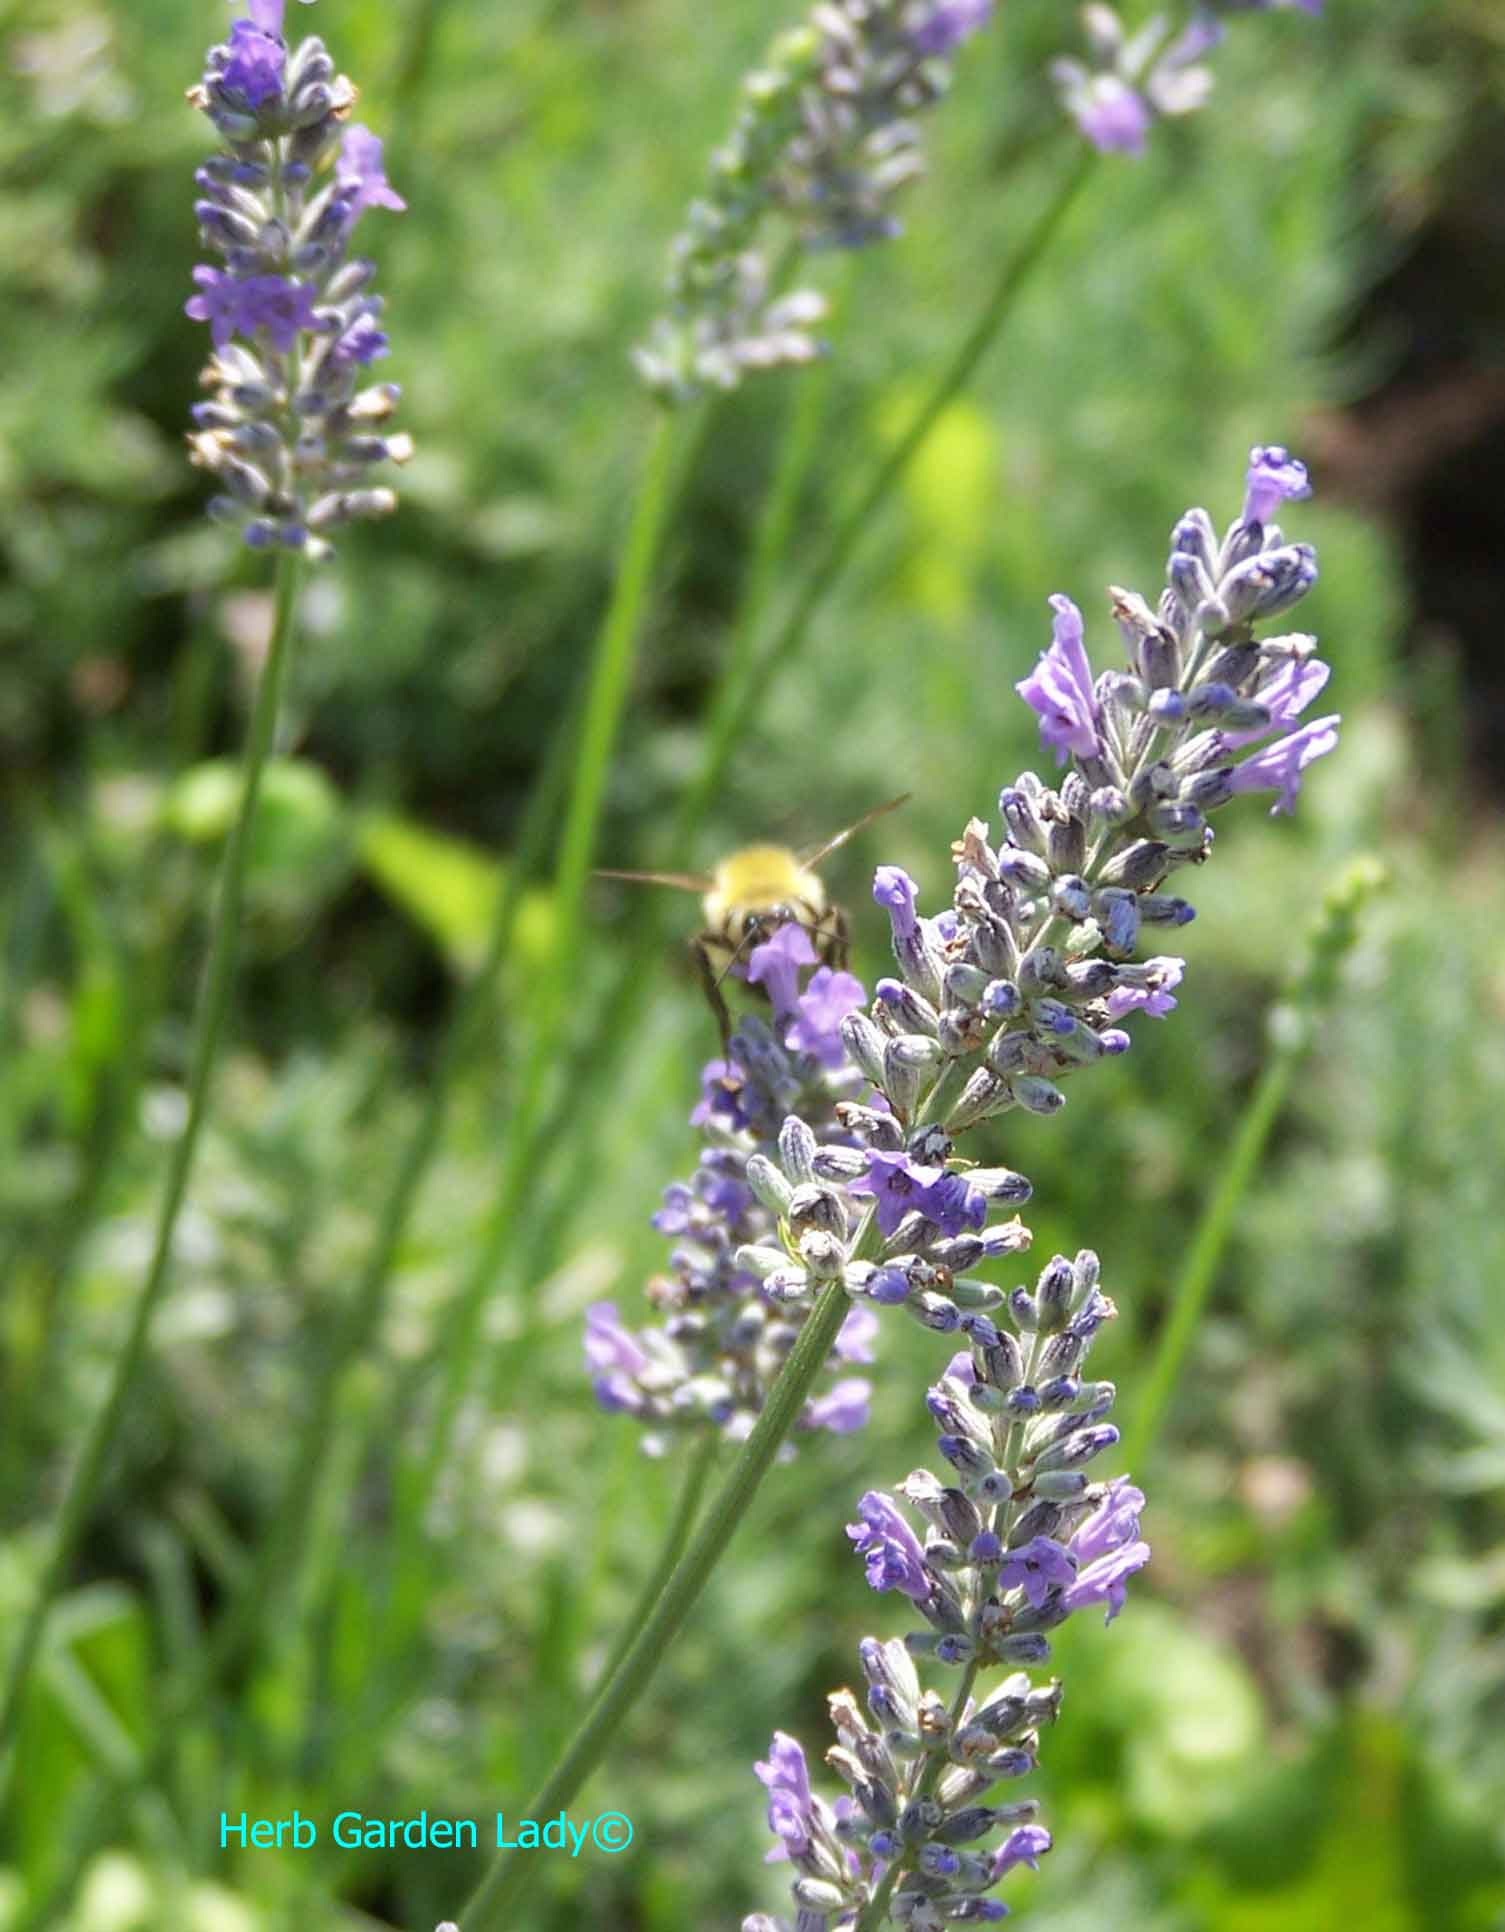 Lavender herb for sachets, teas and aromatherapy